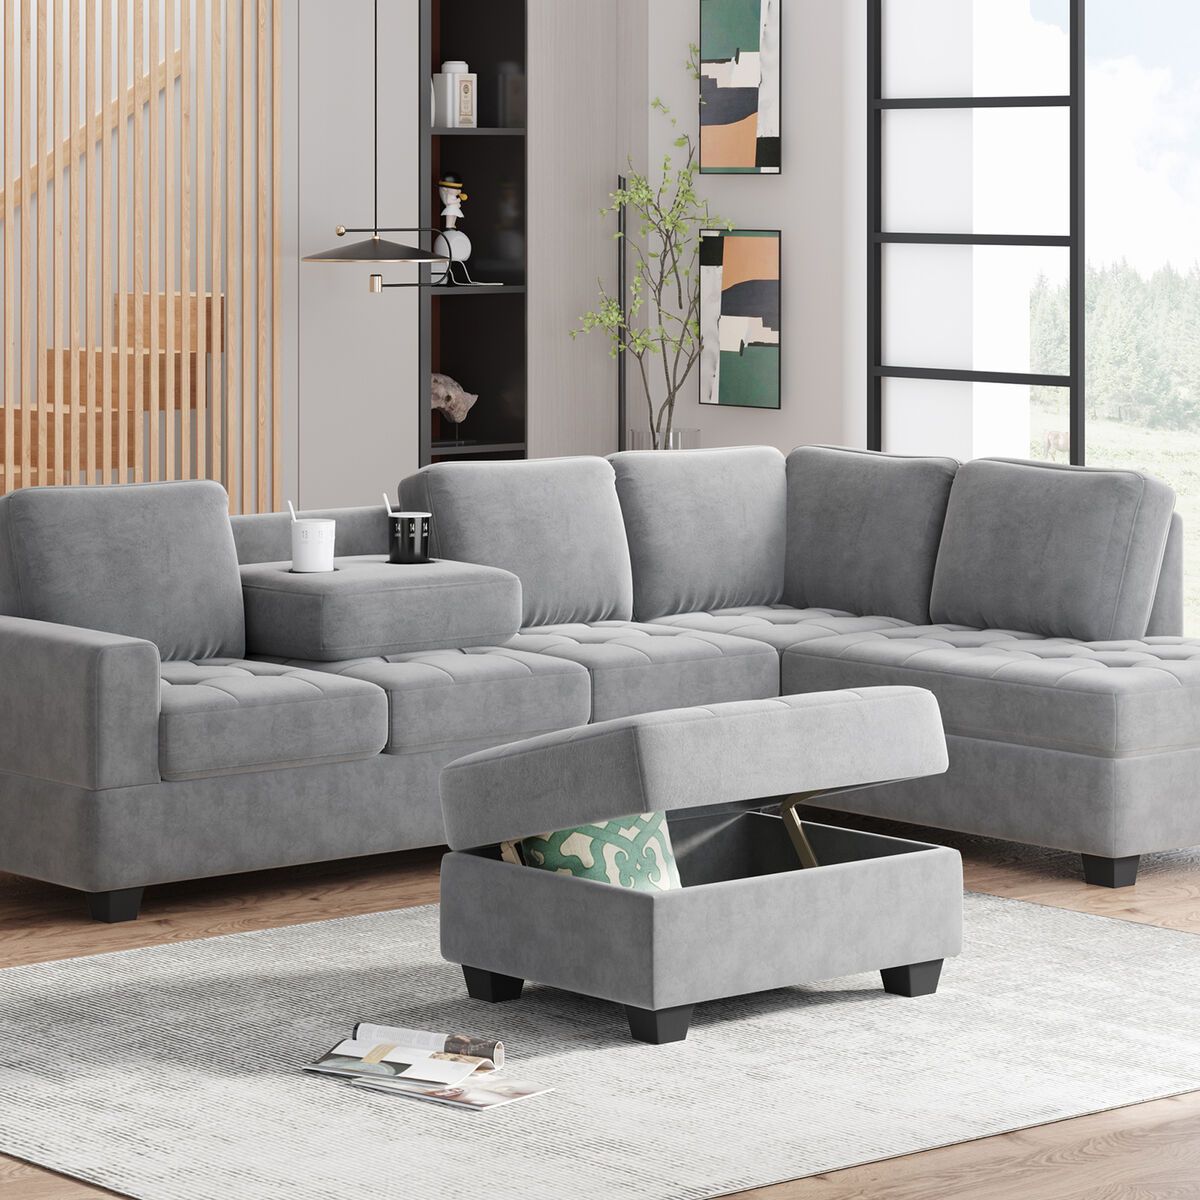 6 Seater L Shaped Sectional Sofa Couch W/ Reversible Chaise Storage  Ottomans Set | Ebay Intended For 6 Seater Sectional Couches (View 8 of 20)